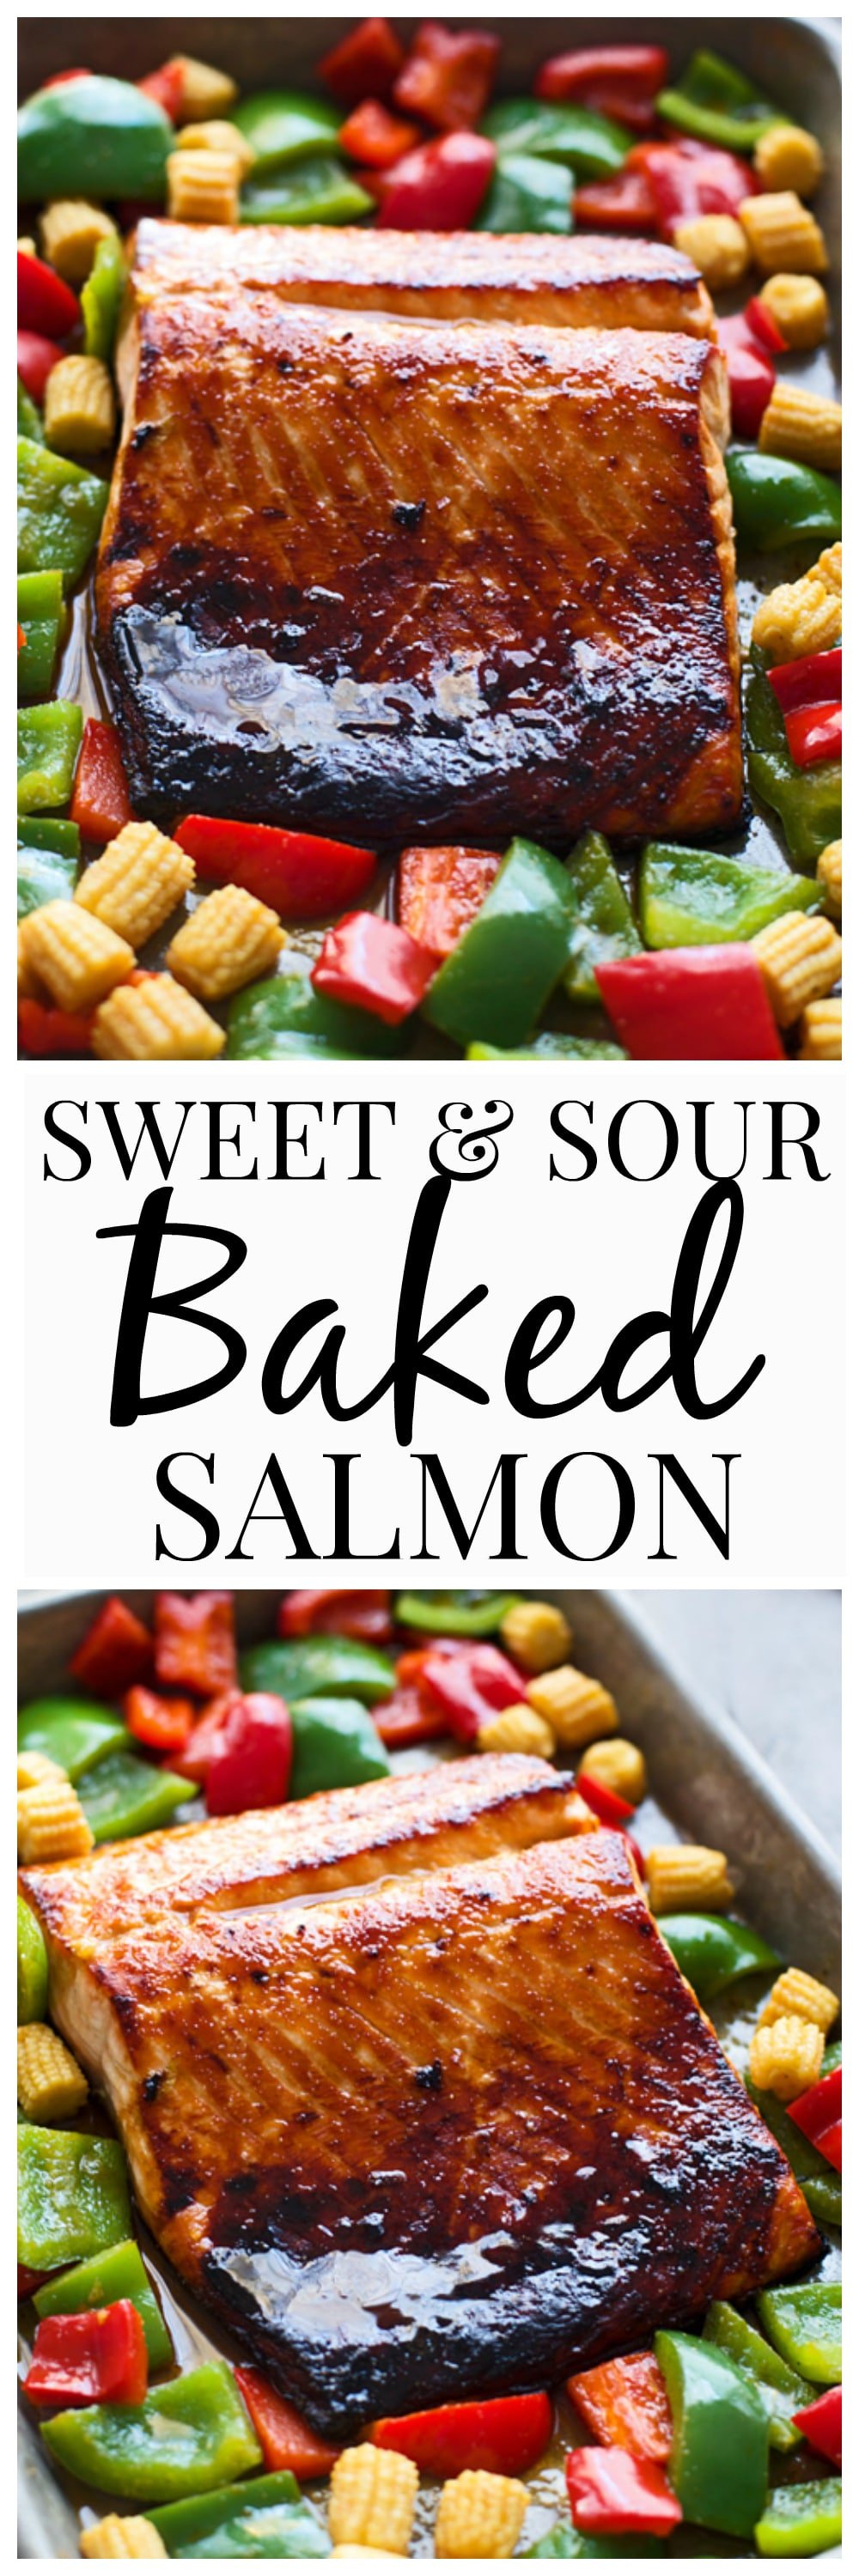 Sweet and Sour Baked Salmon